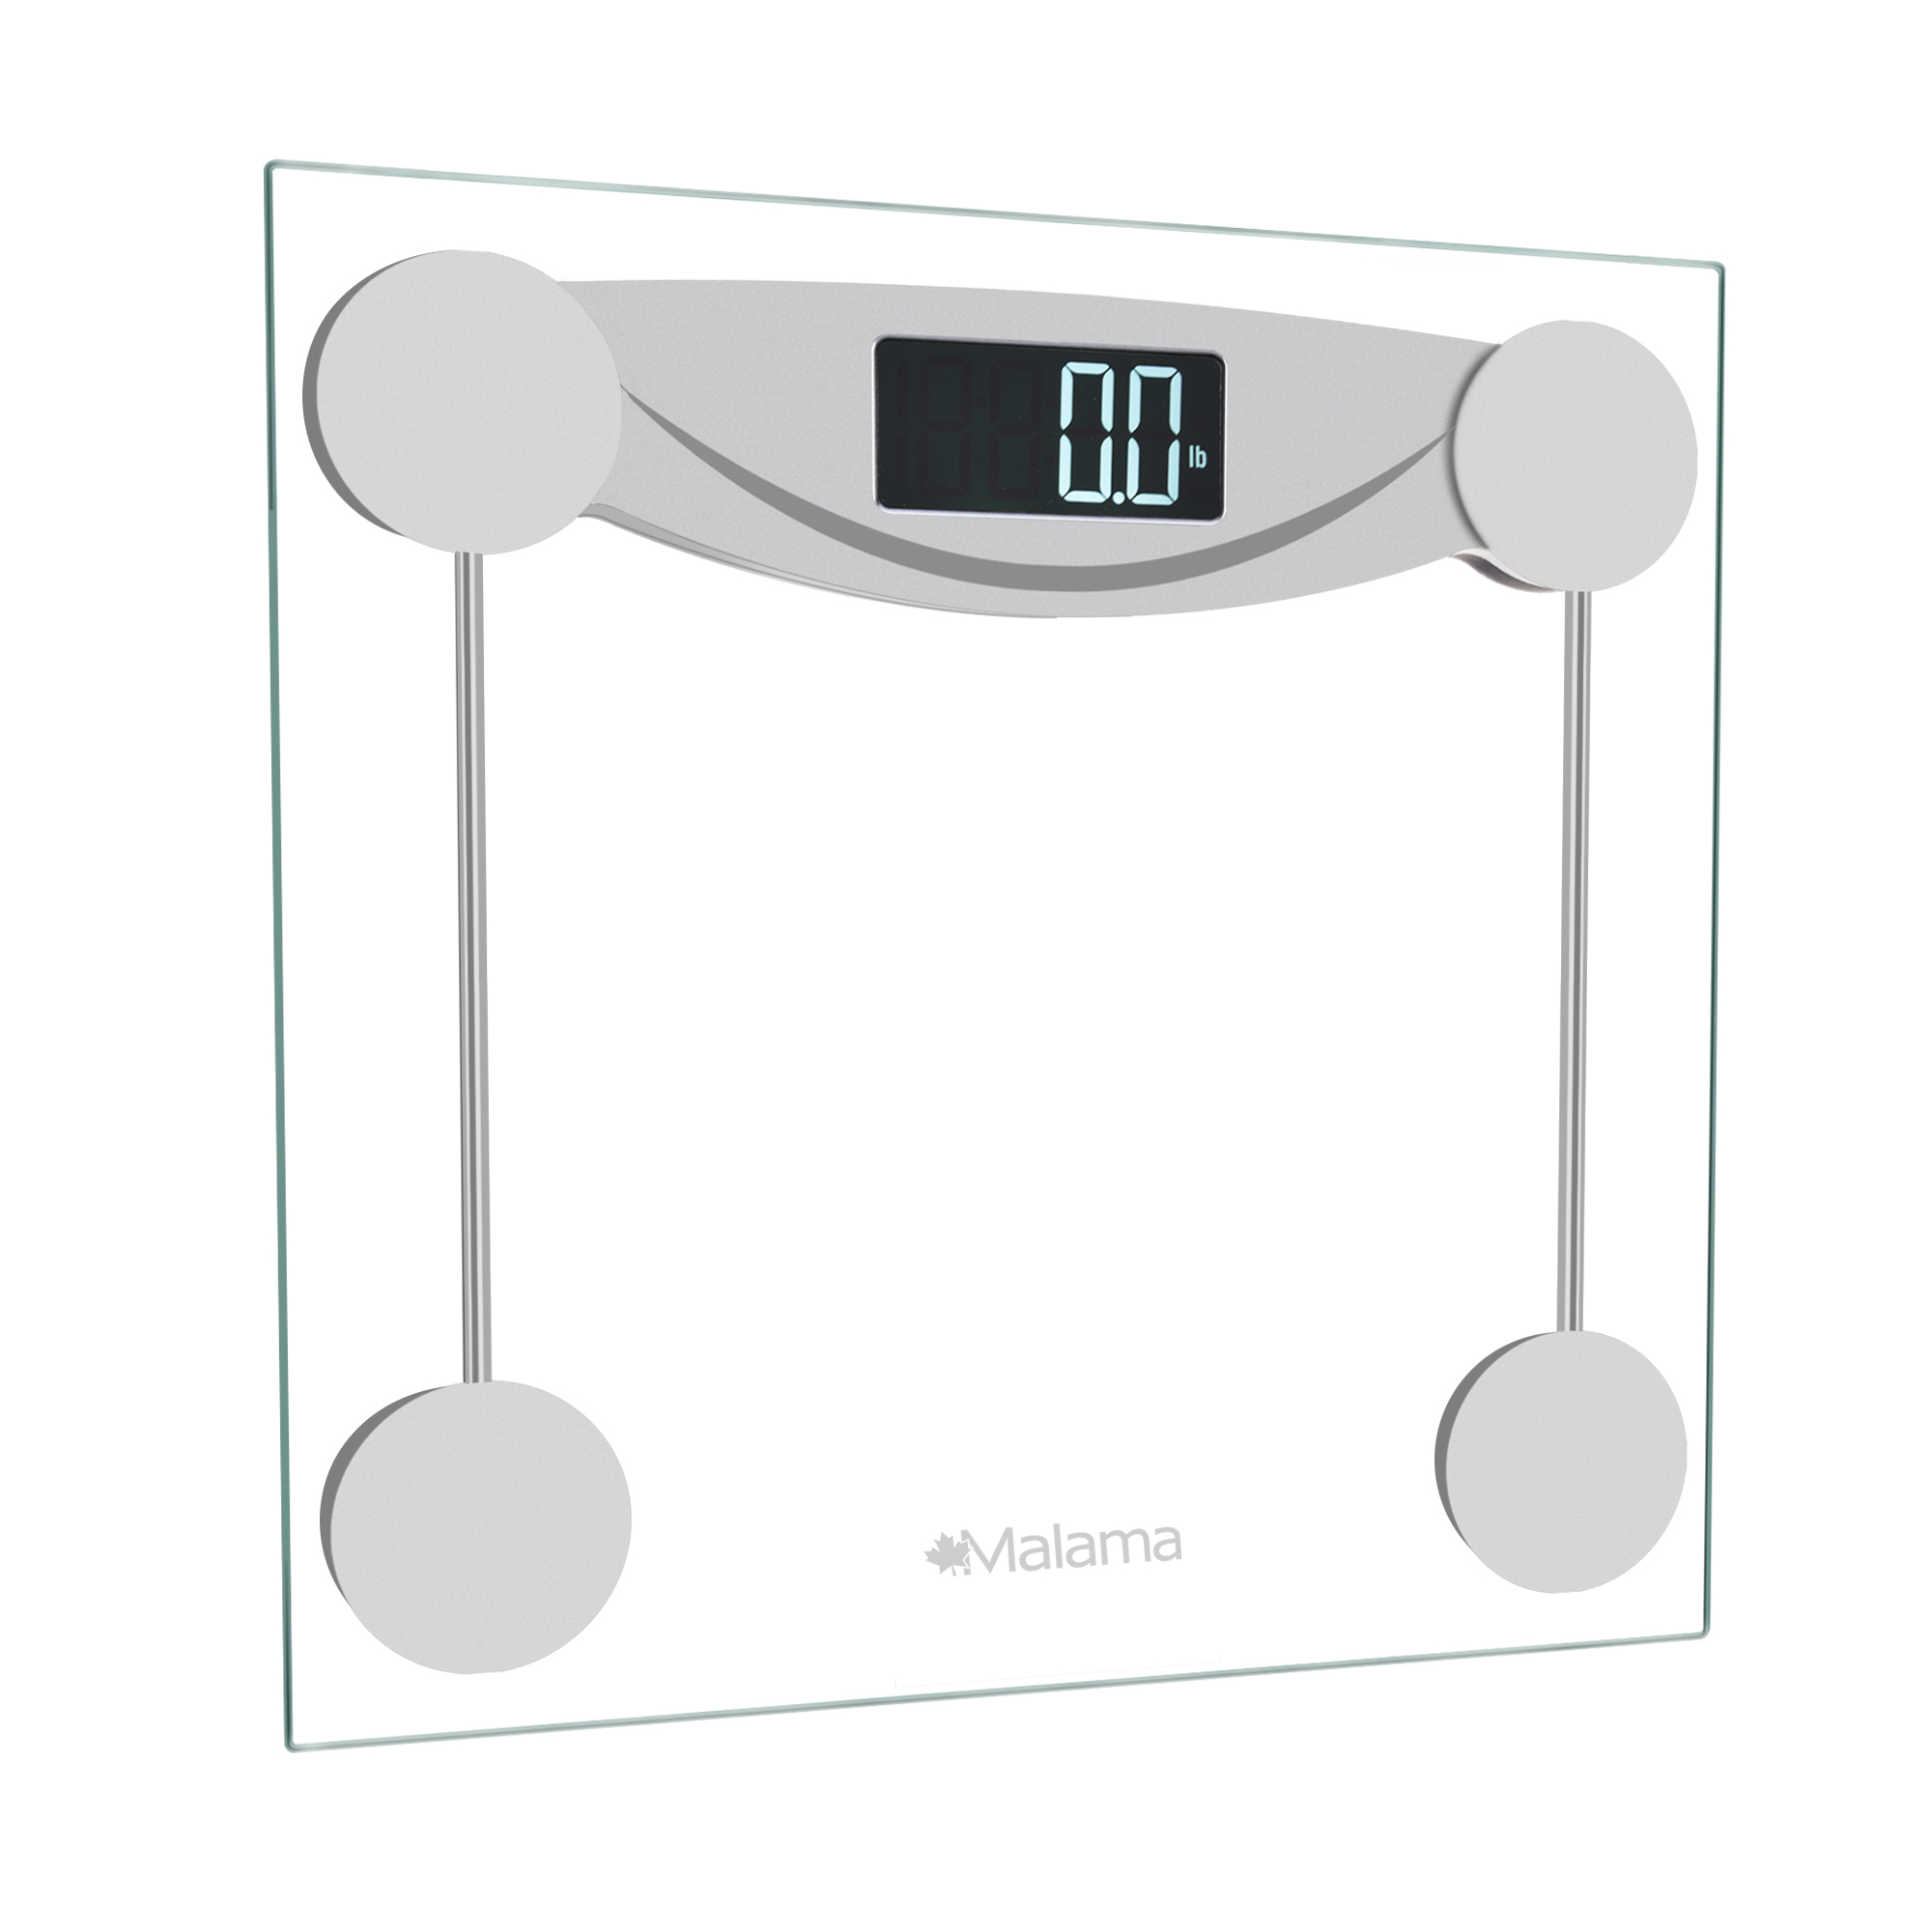 ImStarTrading 120 kilograms Bathroom Scales - Accurate and